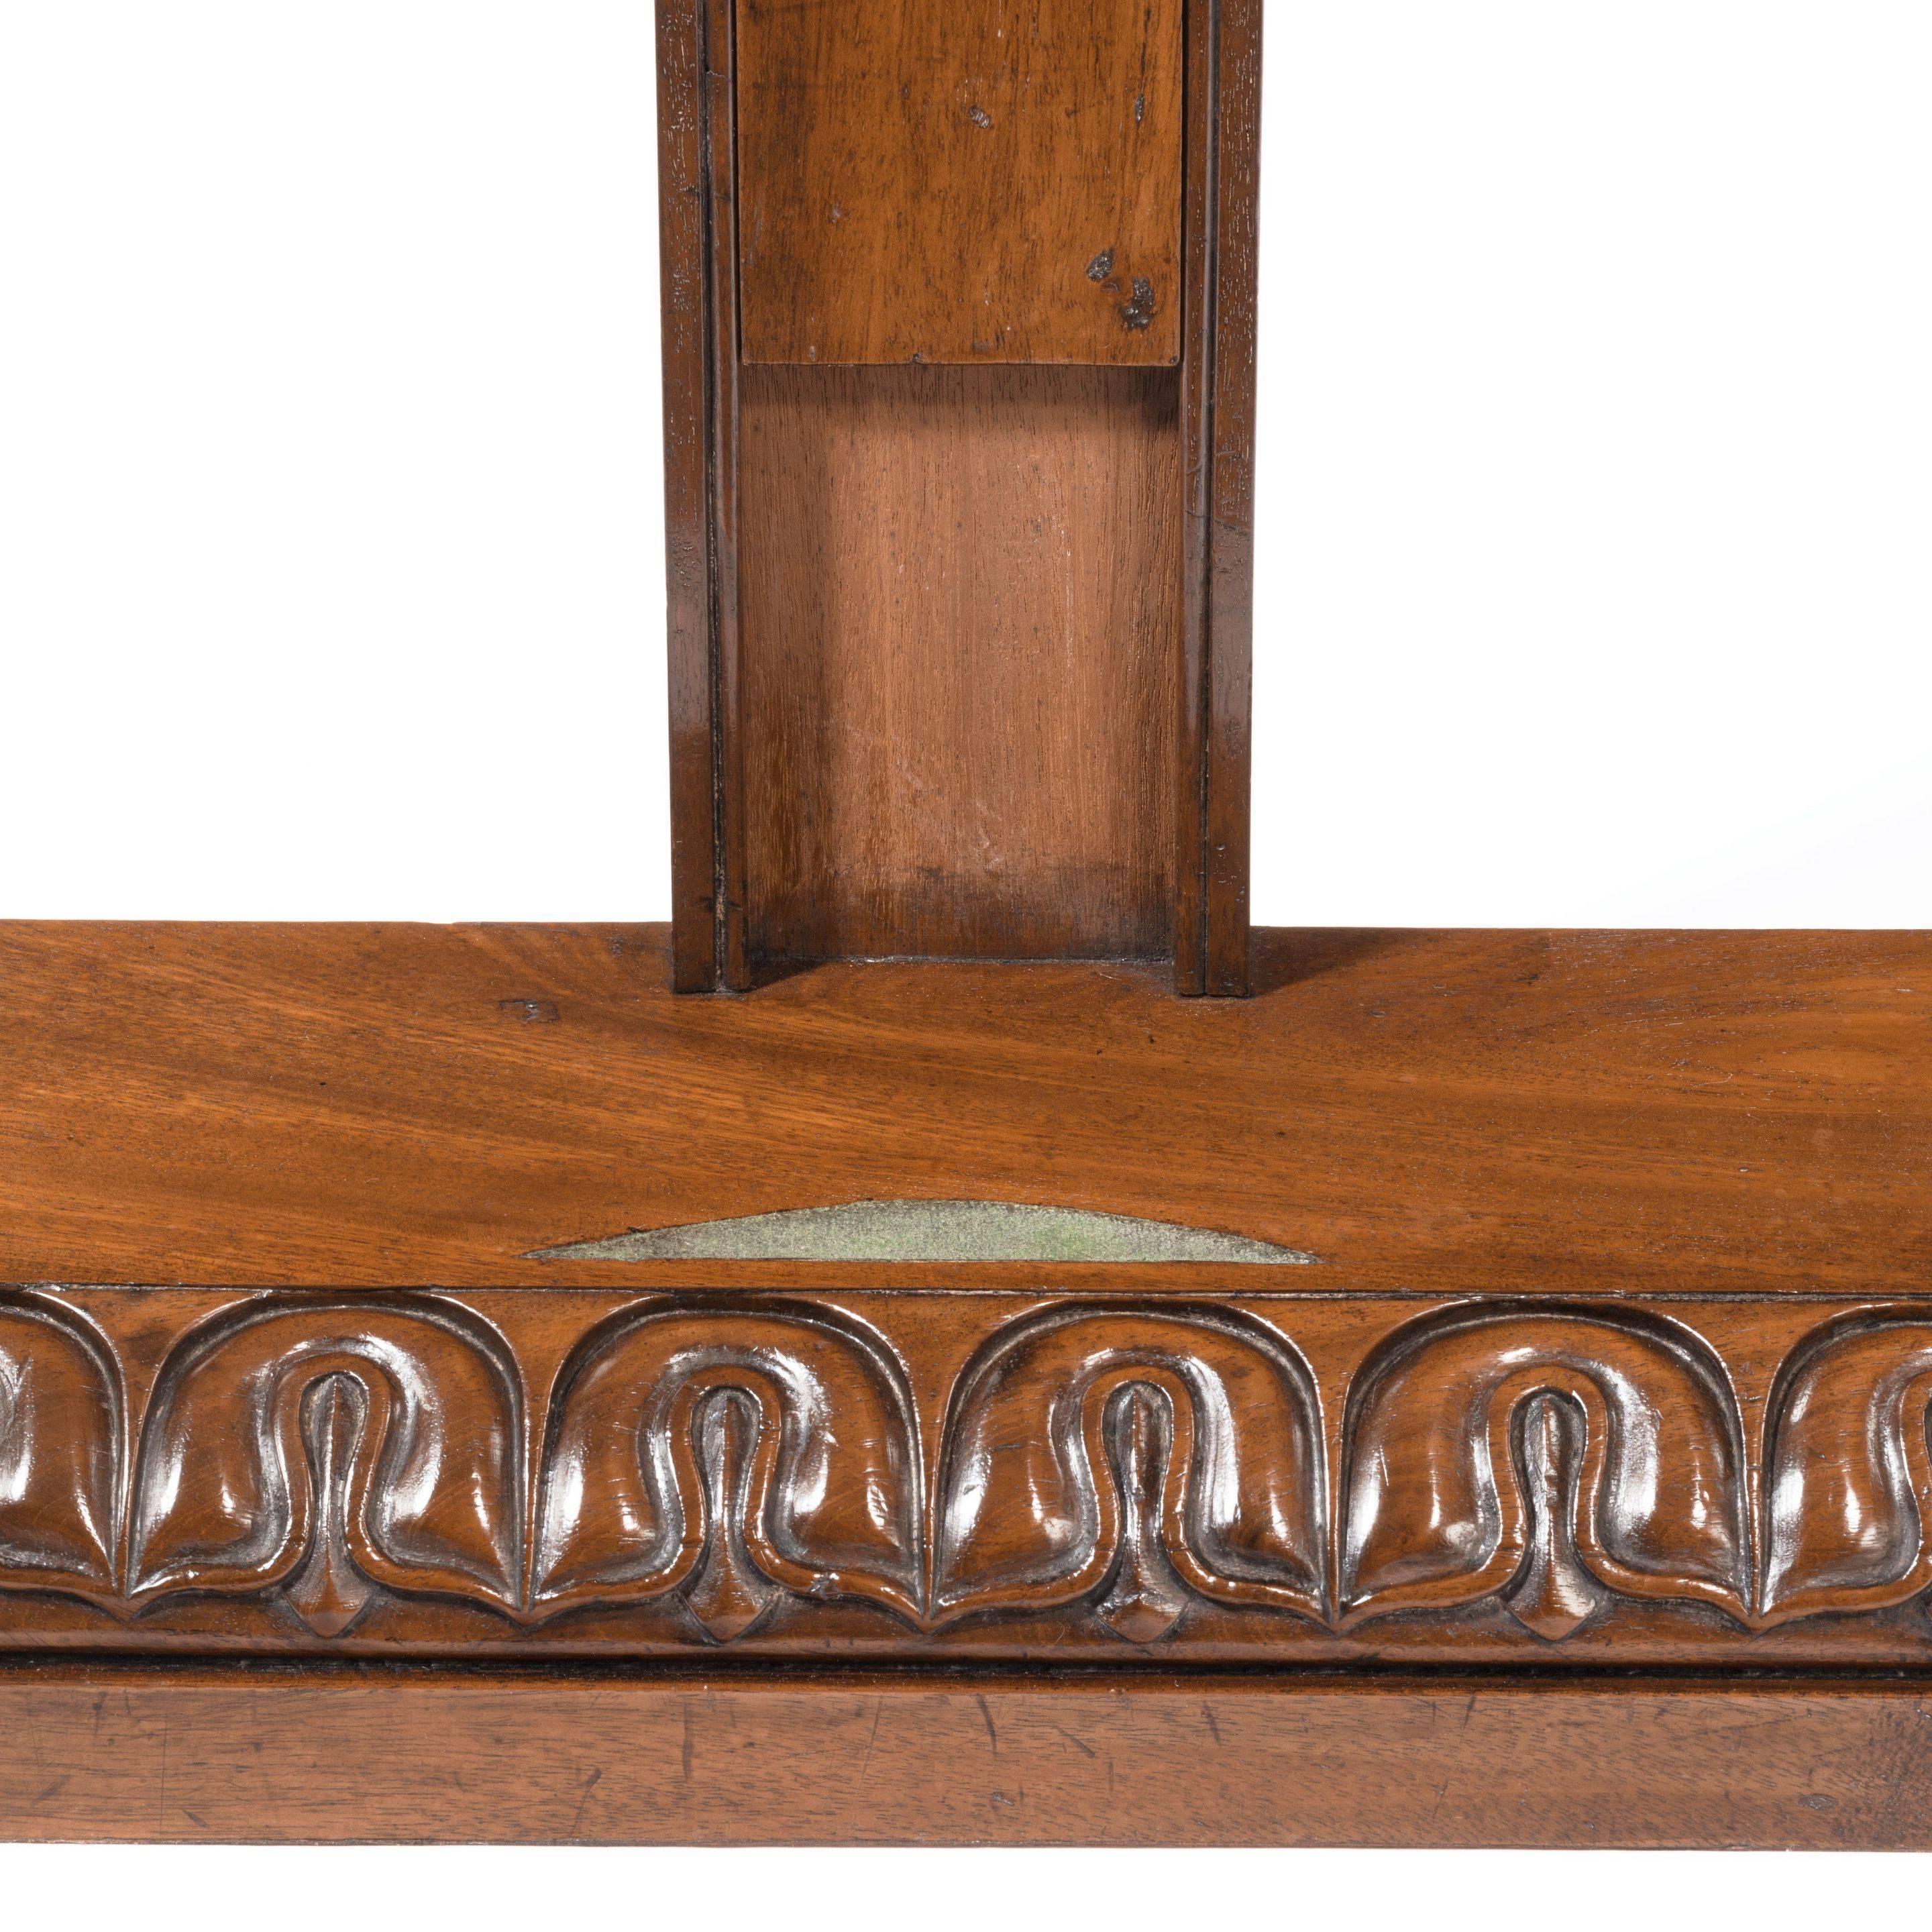 English Pair of Extending Mahogany Salver Stands Attributed to Gillows